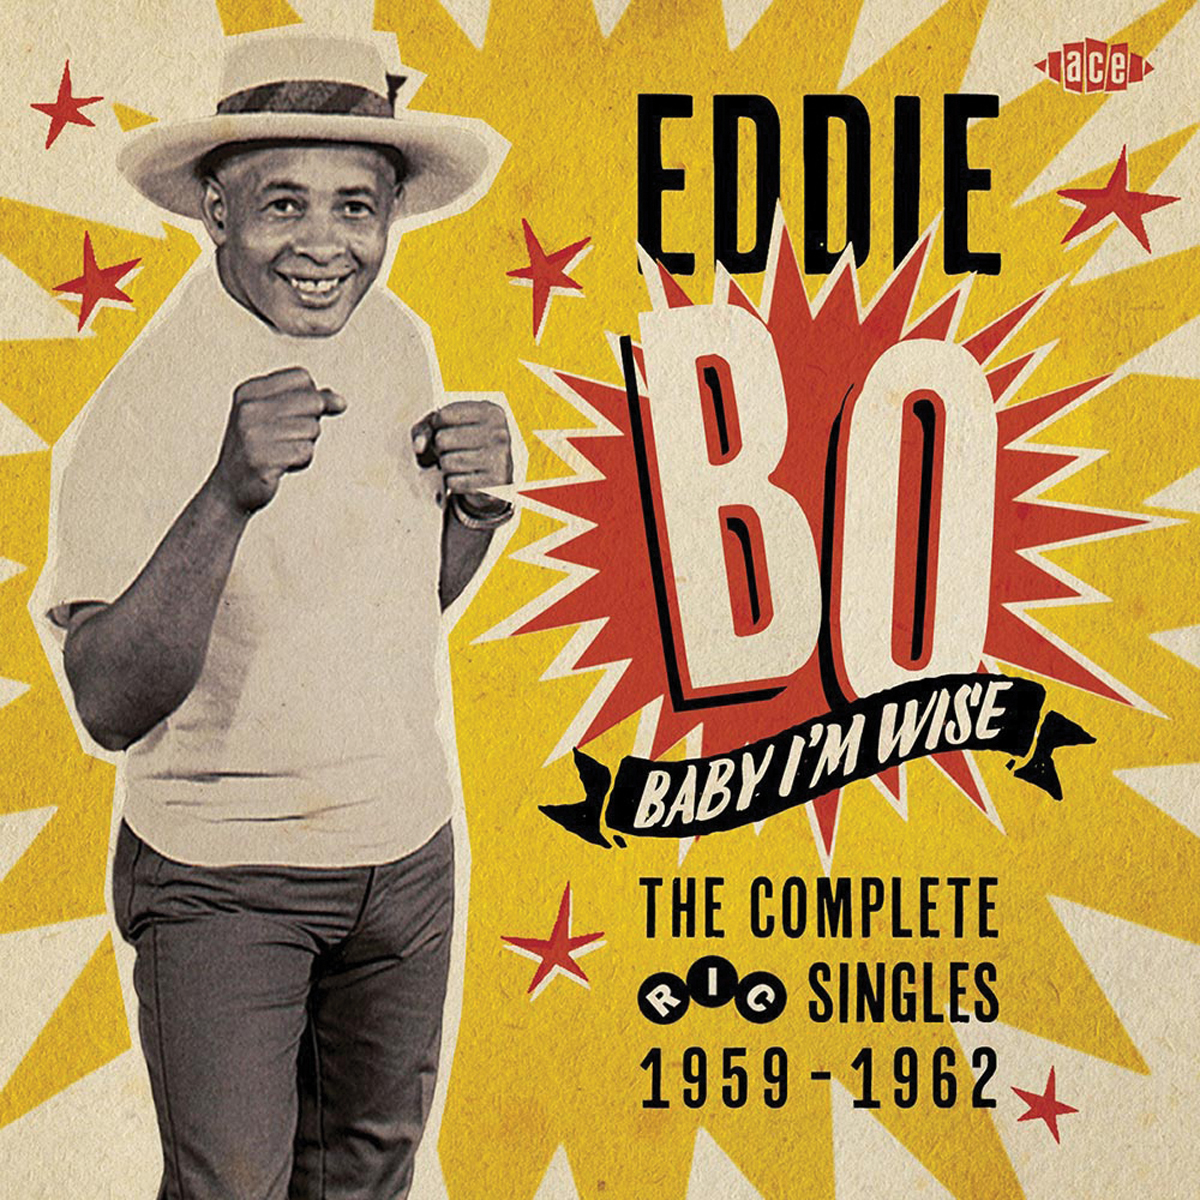 Eddie Bo, Baby I’m Wise: The Complete Ric Singles 1959-1962 (Album Review)1200 x 1200